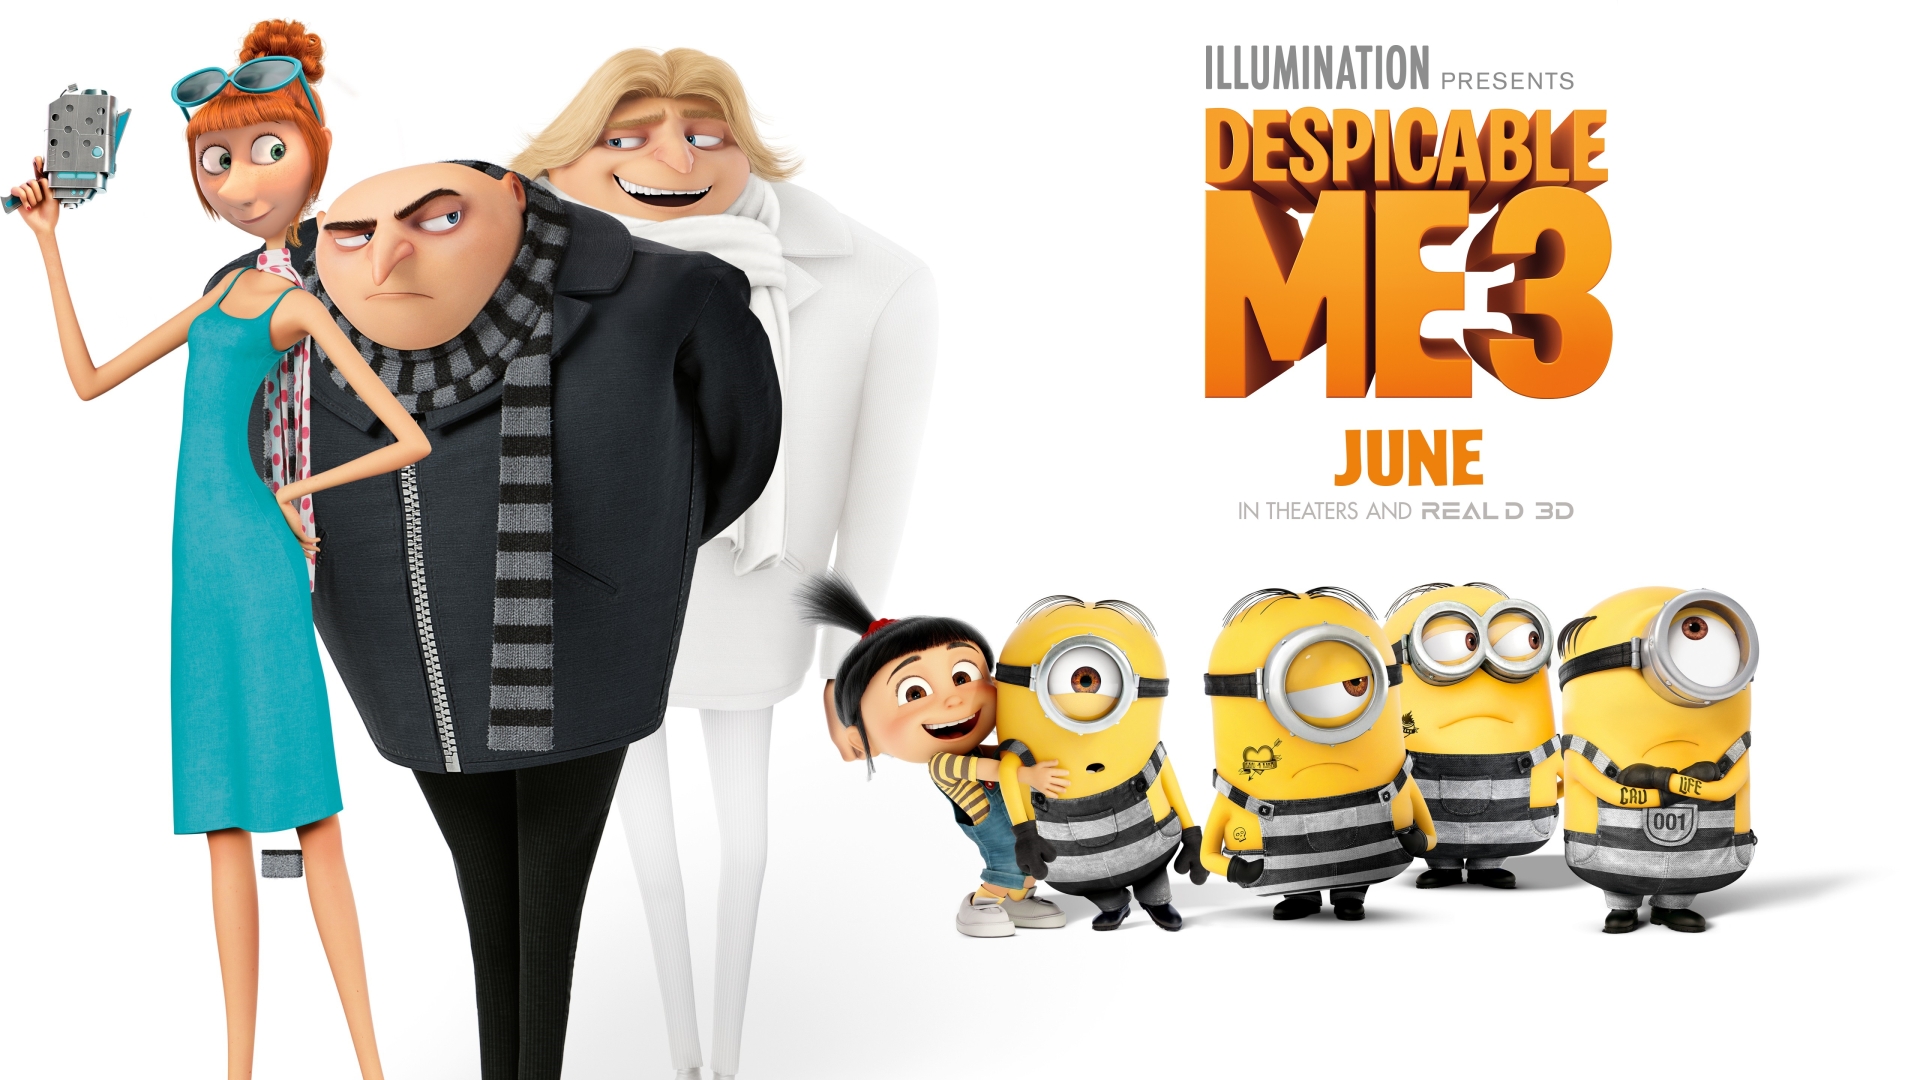 Despicable Me 3 for 1920 x 1080 HDTV 1080p resolution